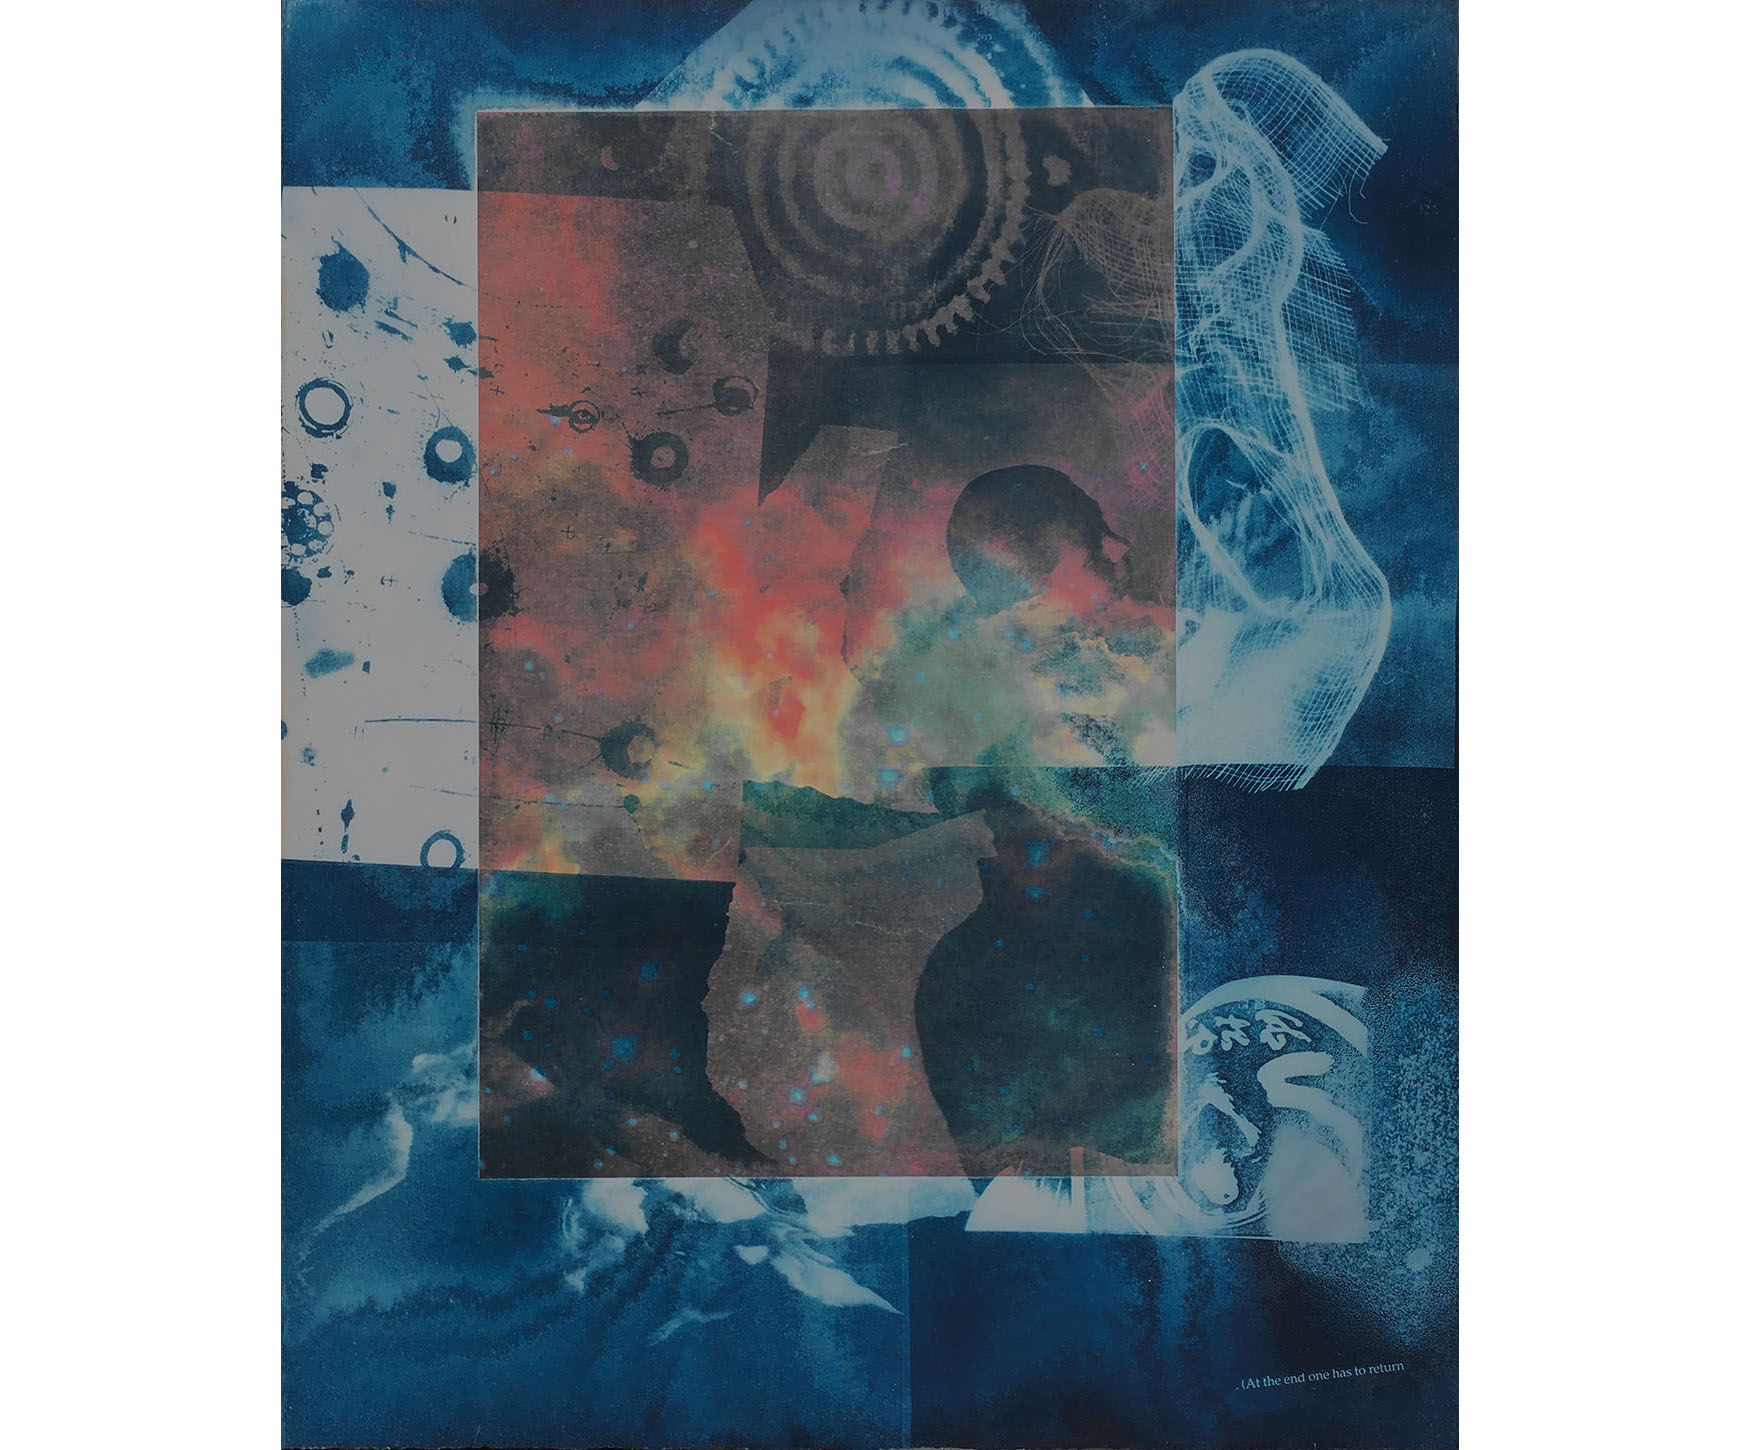  At the End One Has to Return, 1997. Cyanotype on paper, 22 x 18 